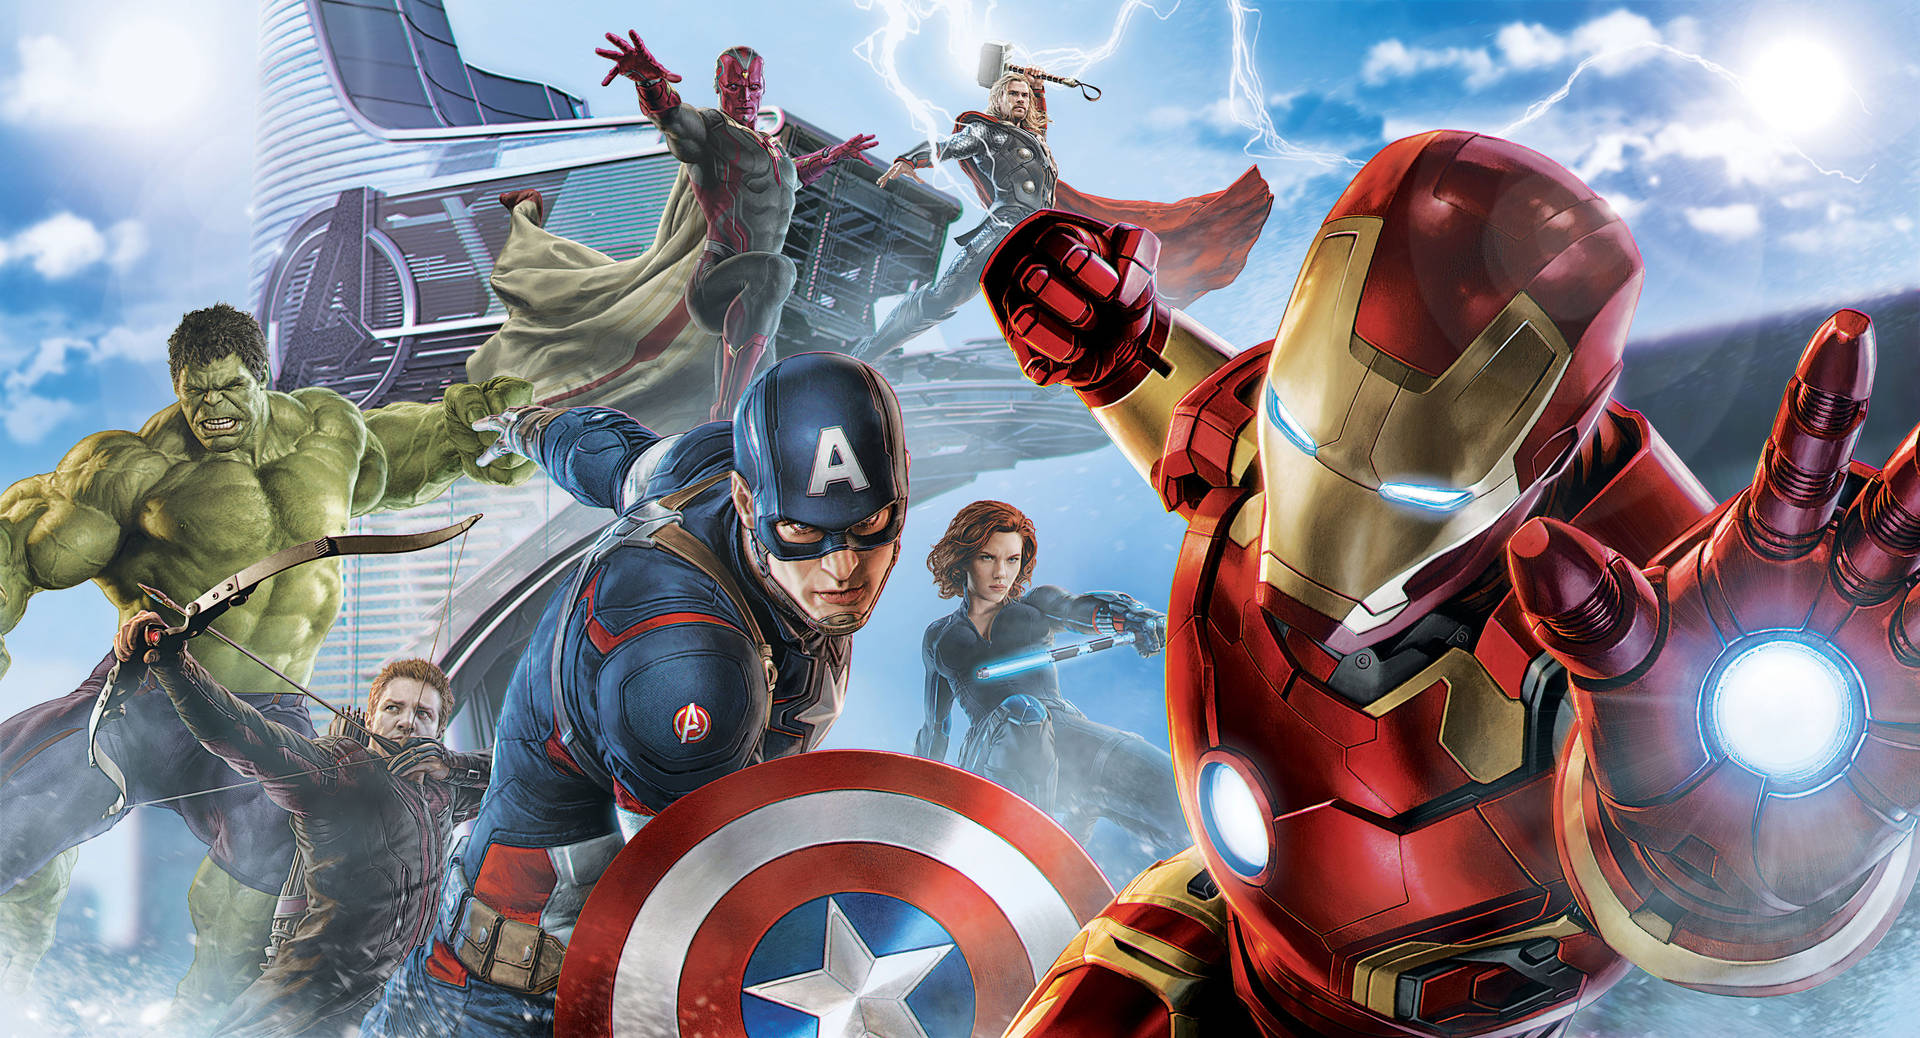 Unite to save the world - The Avengers Wallpaper